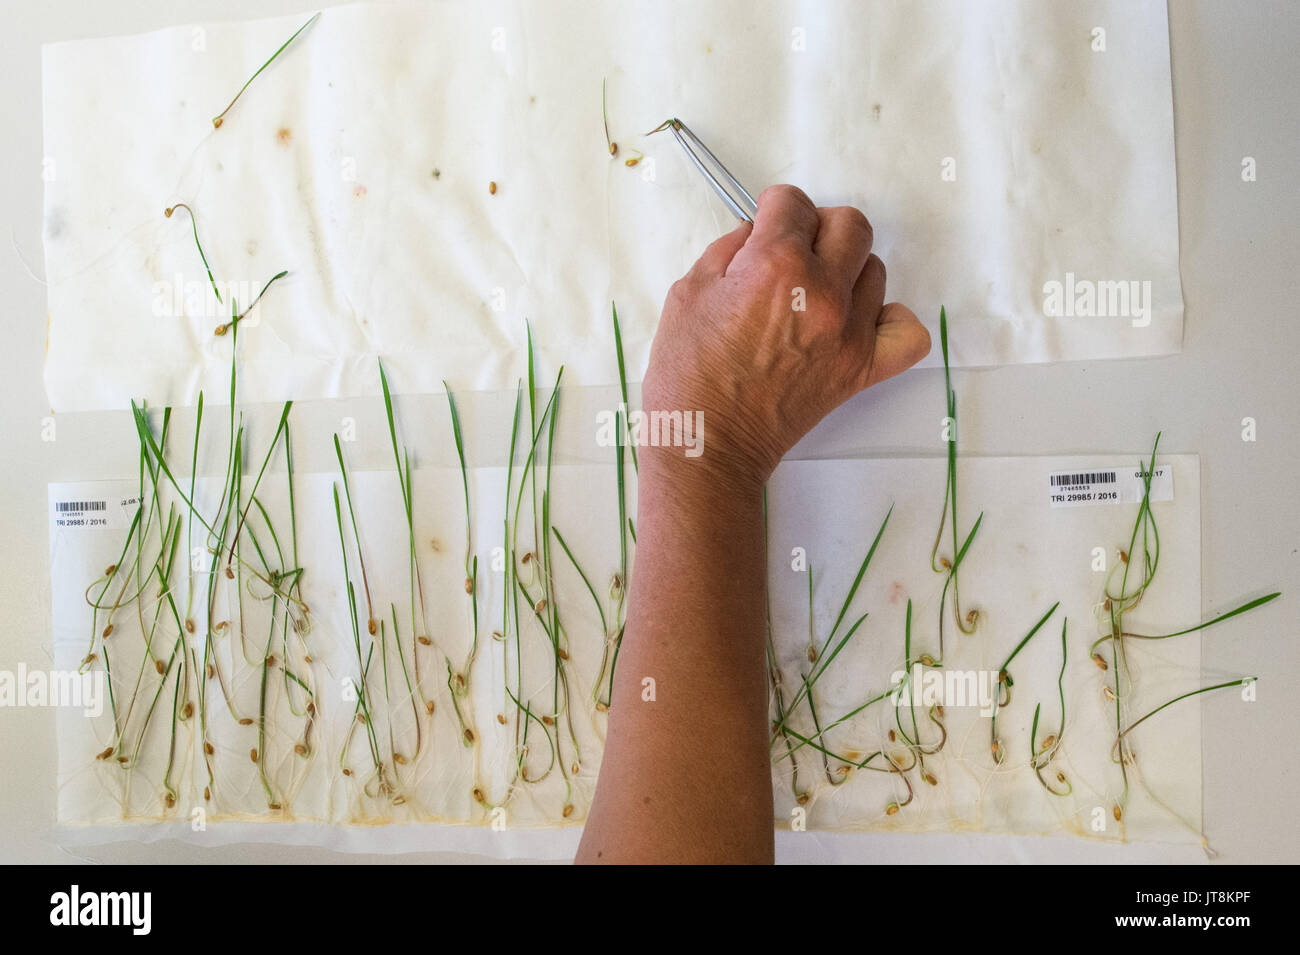 Gatersleben, Germany. 8th Aug, 2017. An employee of the Leibniz-Institute of Plant Genetics and Crop Plant Research (IPK) sorting wheat seedlings at the IPK in Gatersleben, Germany, 8 August 2017. The IPK collects seeds form around the world, with 150,000 samples in its gene bank, which is the biggest in the European Union. Photo: Klaus-Dietmar Gabbert/dpa-Zentralbild/ZB/dpa/Alamy Live News Stock Photo